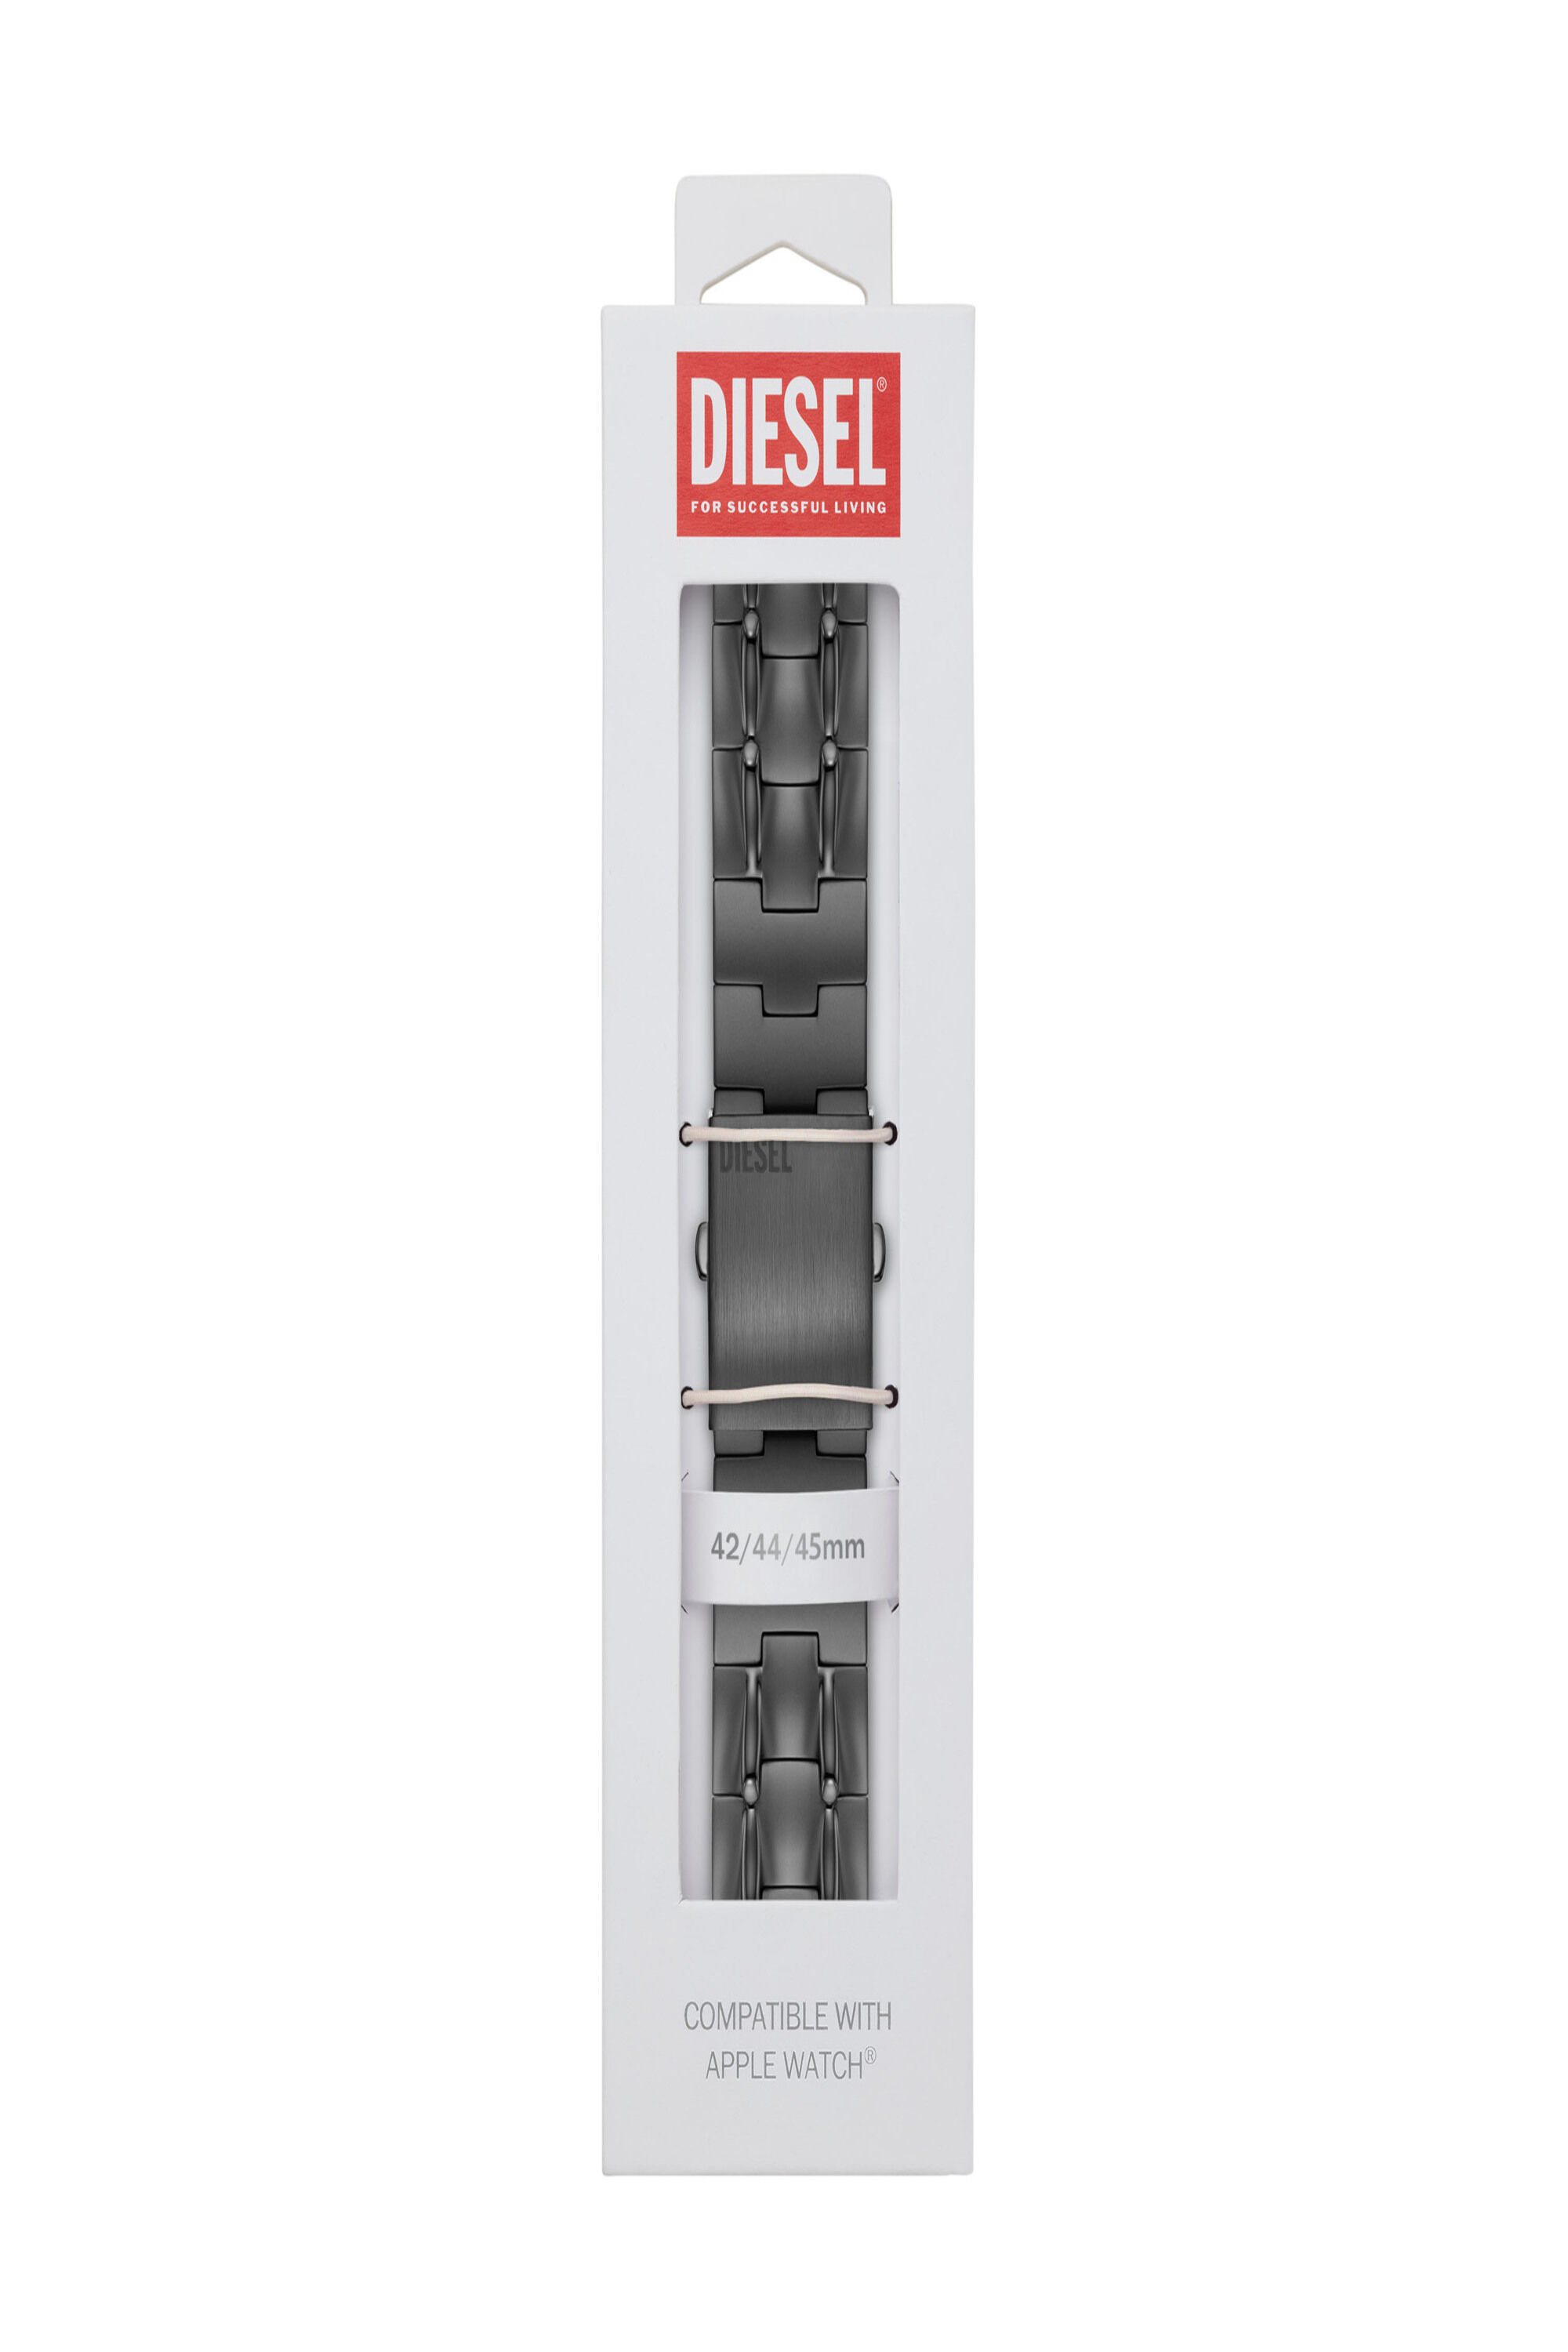 Diesel - DSS0015, Unisex stainless steel Band for Apple watch®, 42/44/45mm in Grey - Image 2